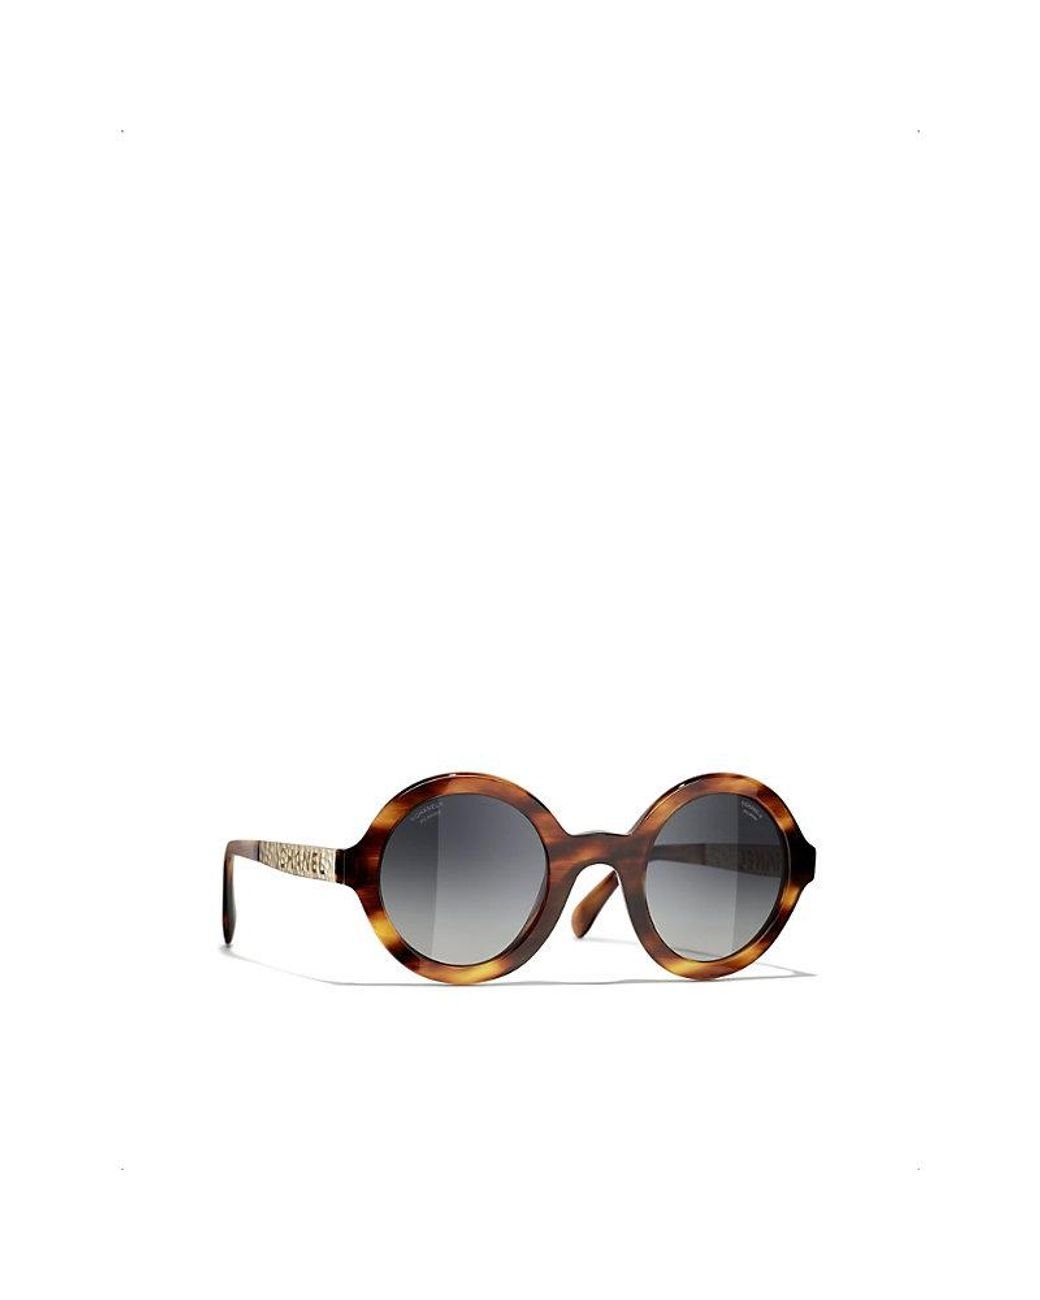 Chanel Round Sunglasses in Brown